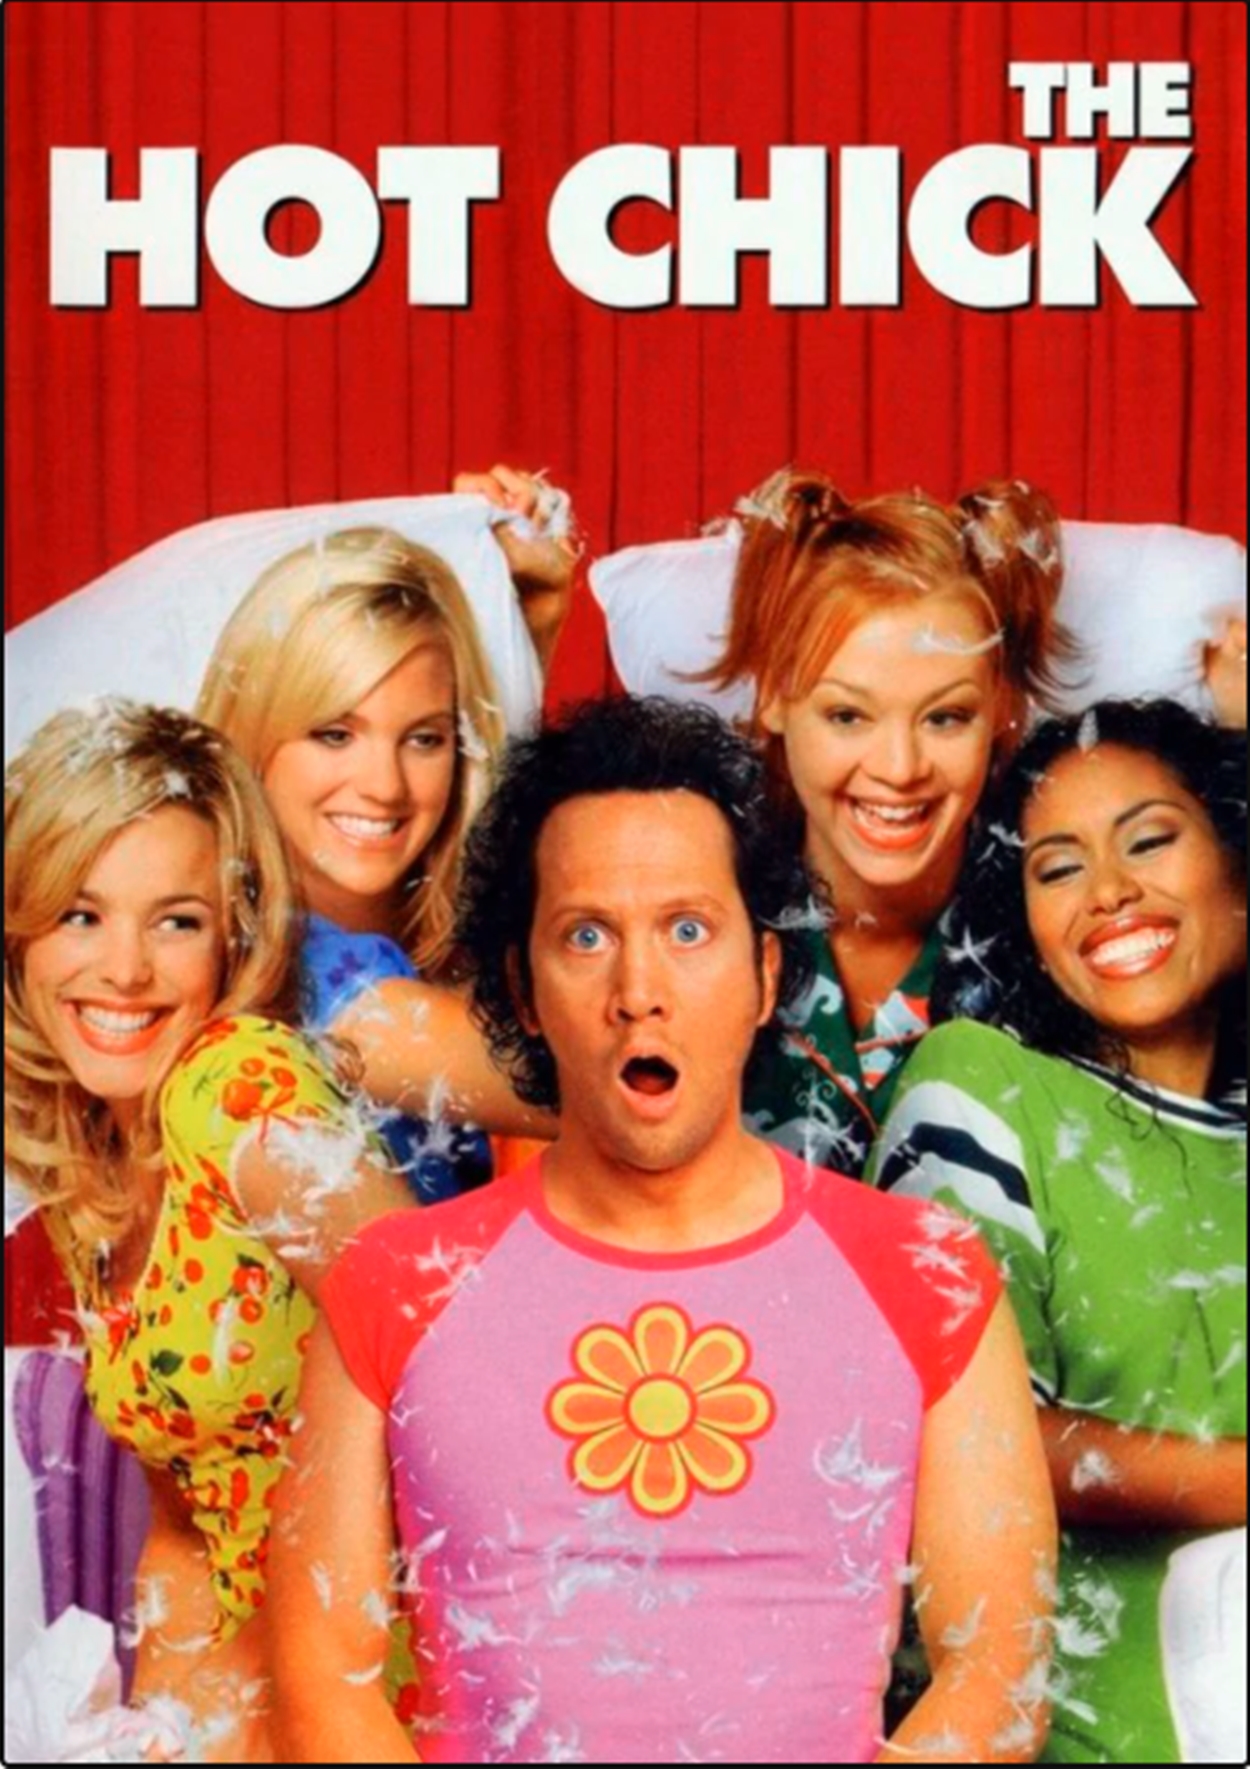 Pôster, filme "The Hot Chick".